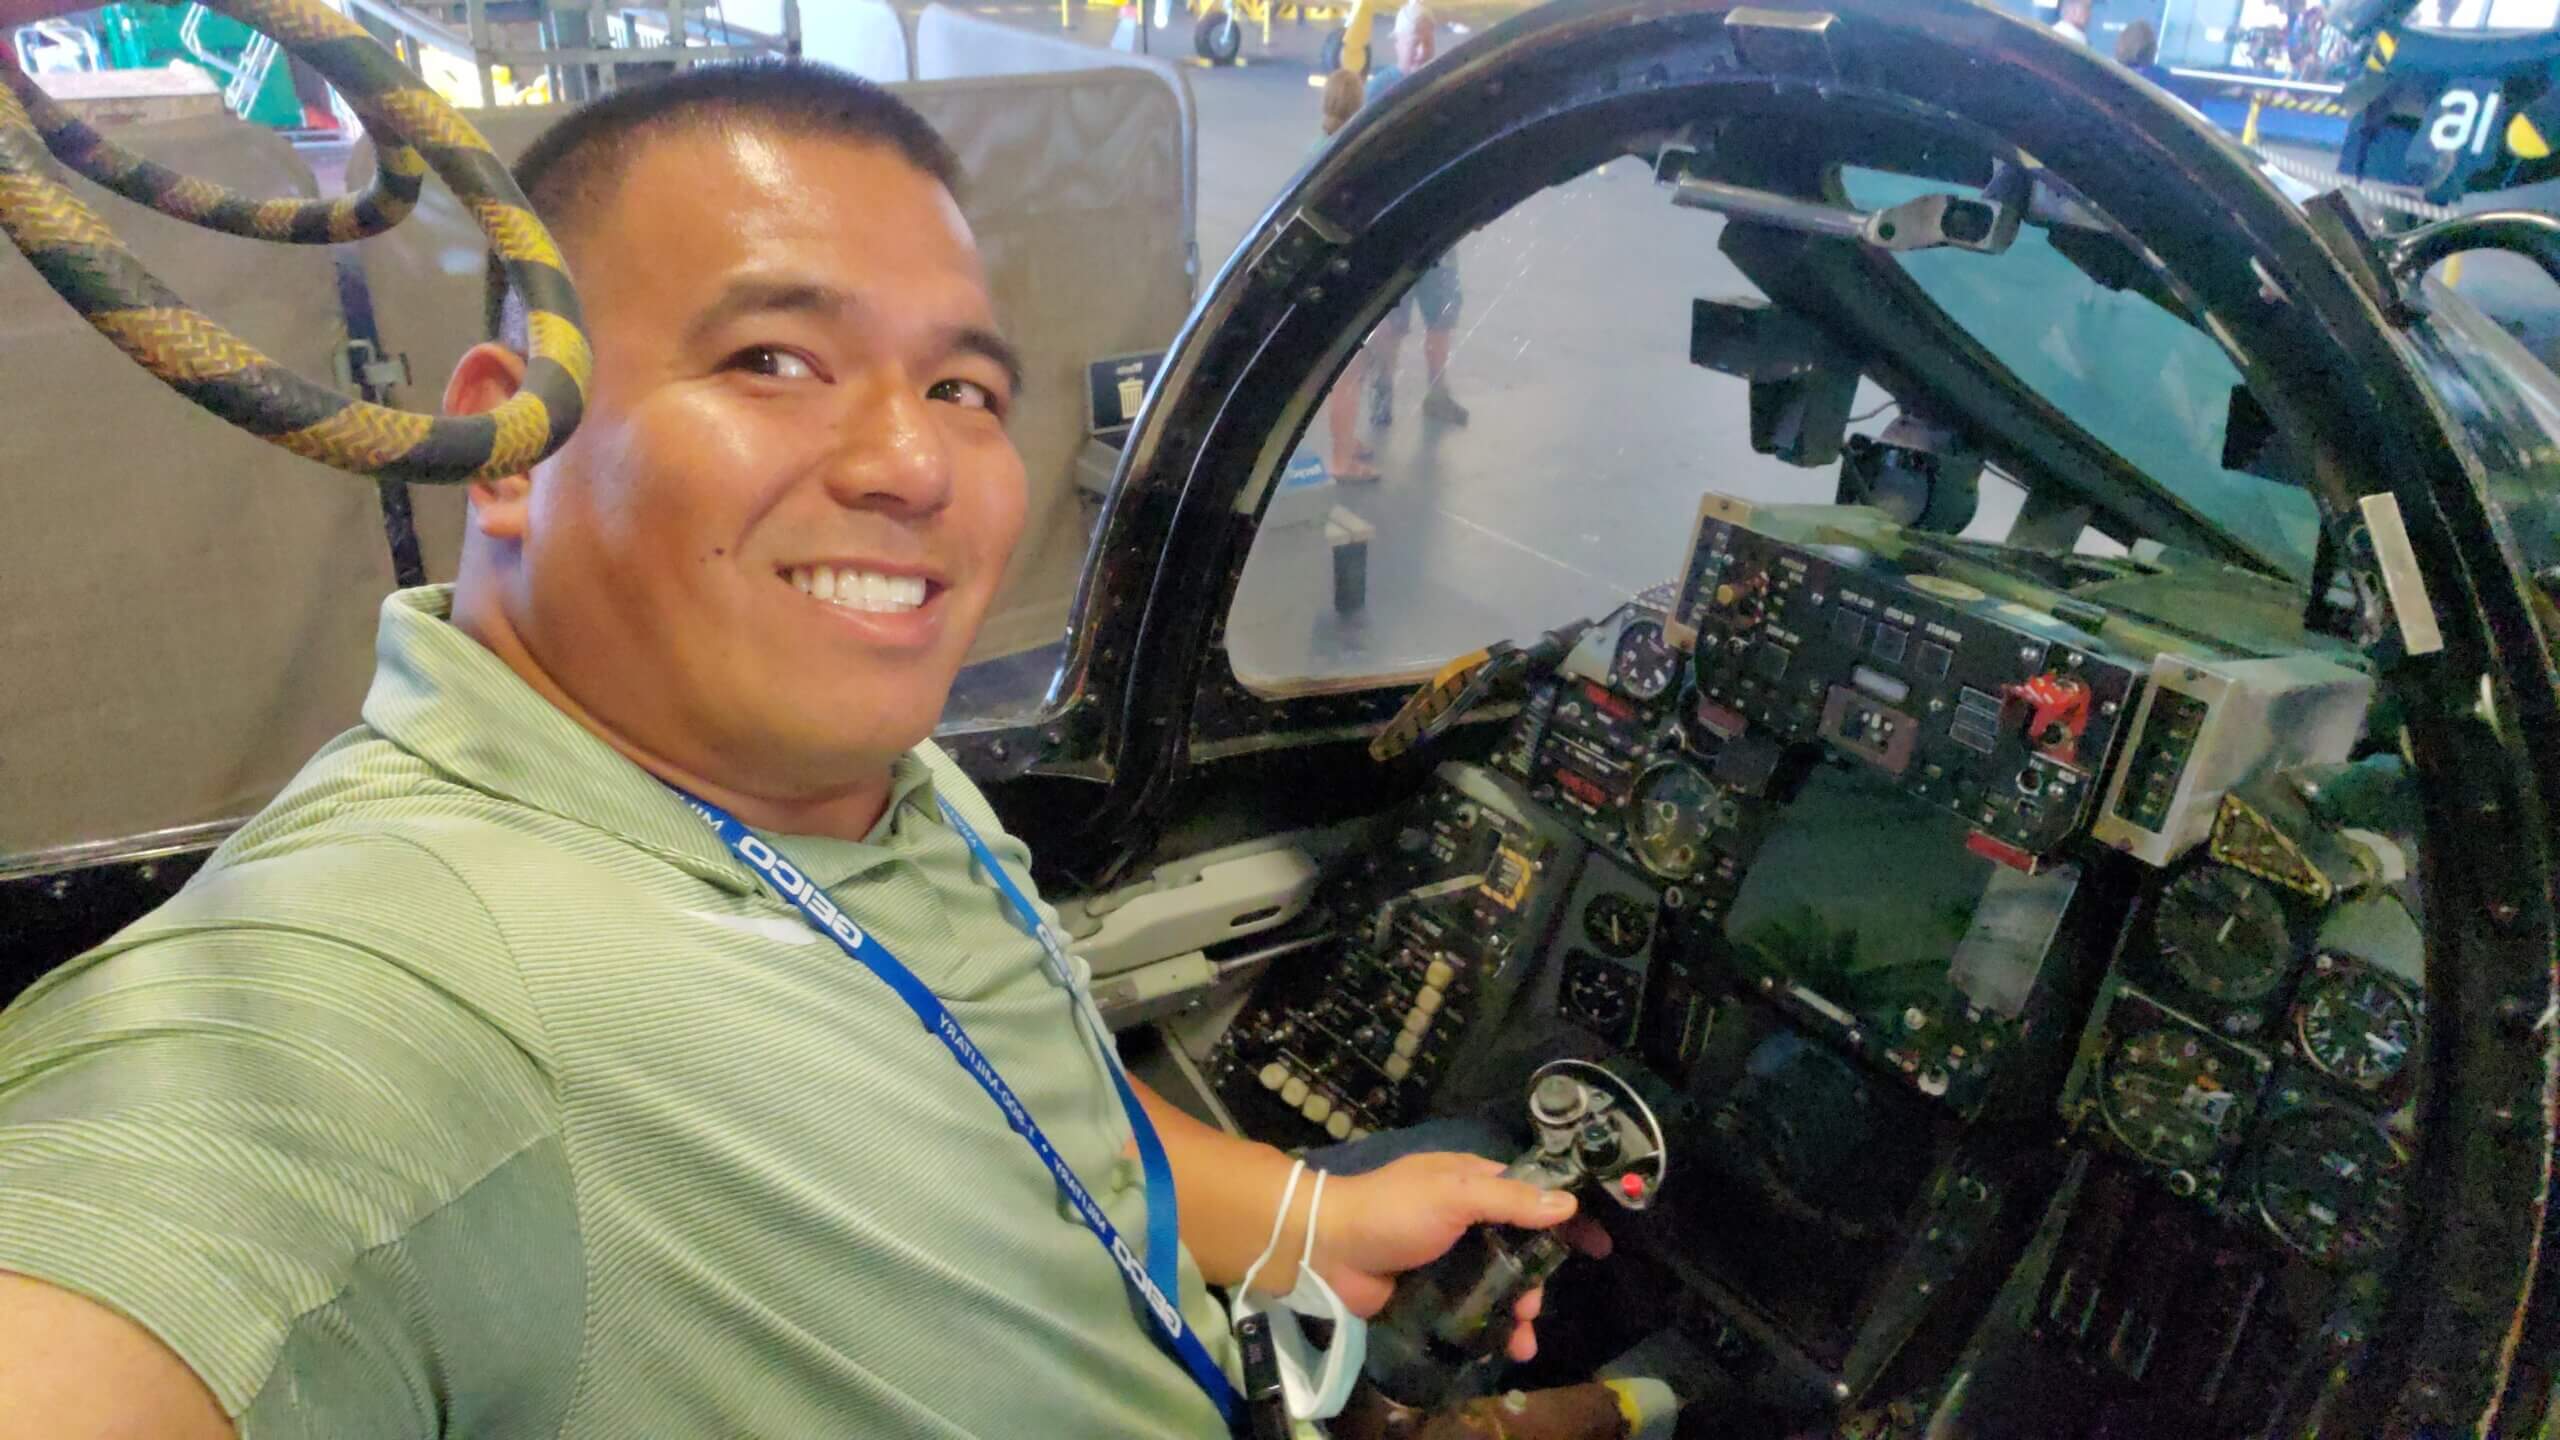 JoeyBolo77 sits in the cockpit of an F-14 Tomcat at the USS Midway Museum in San Diego.